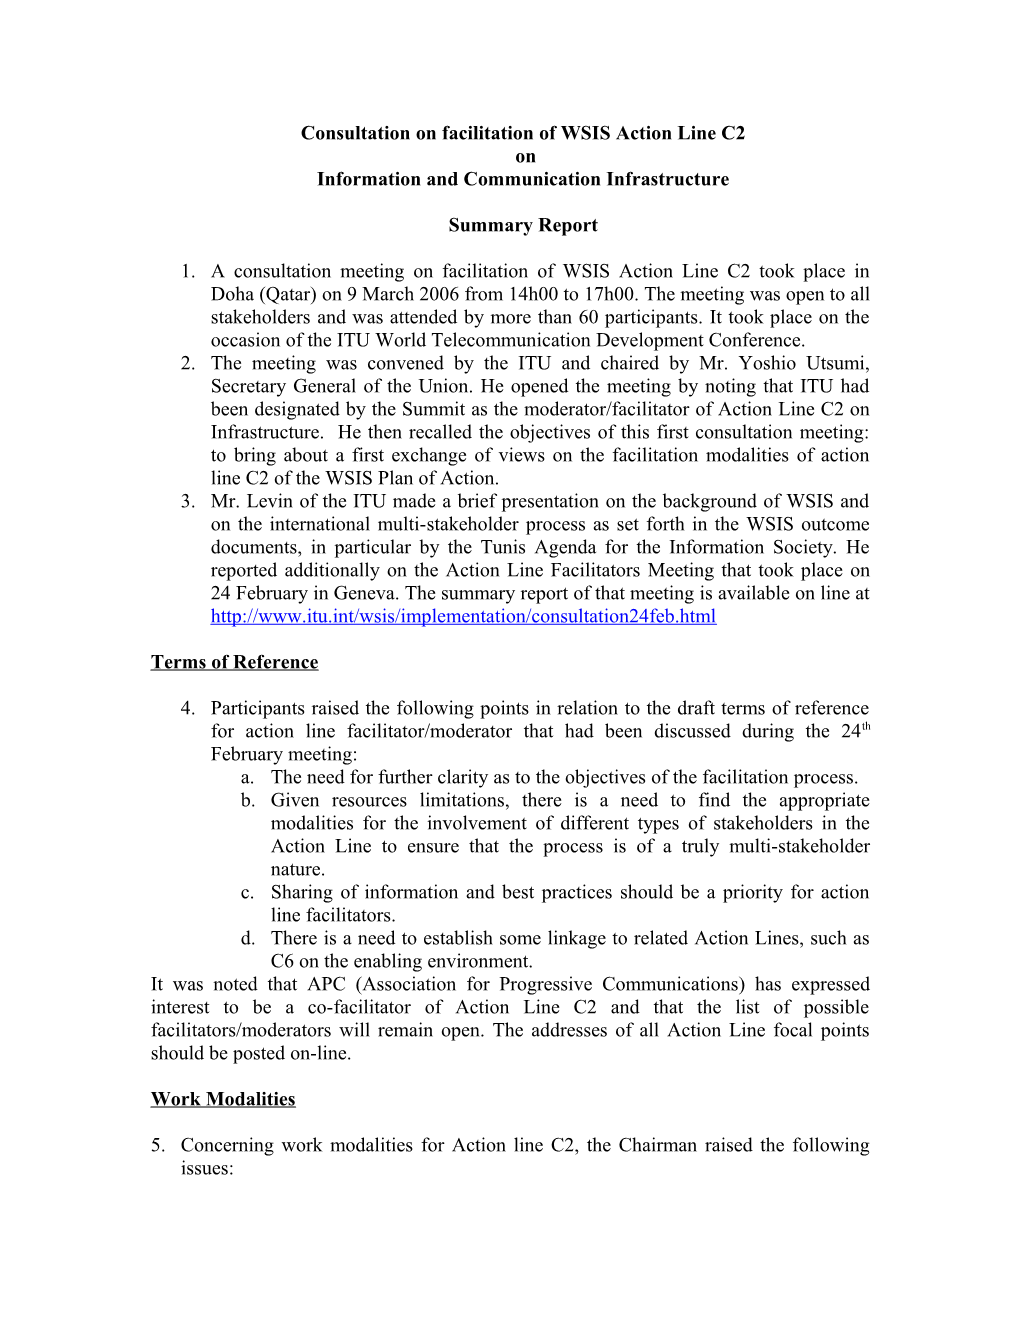 Summary Report of the Consultation on Facilitation of WSIS Action Line C2 on Information